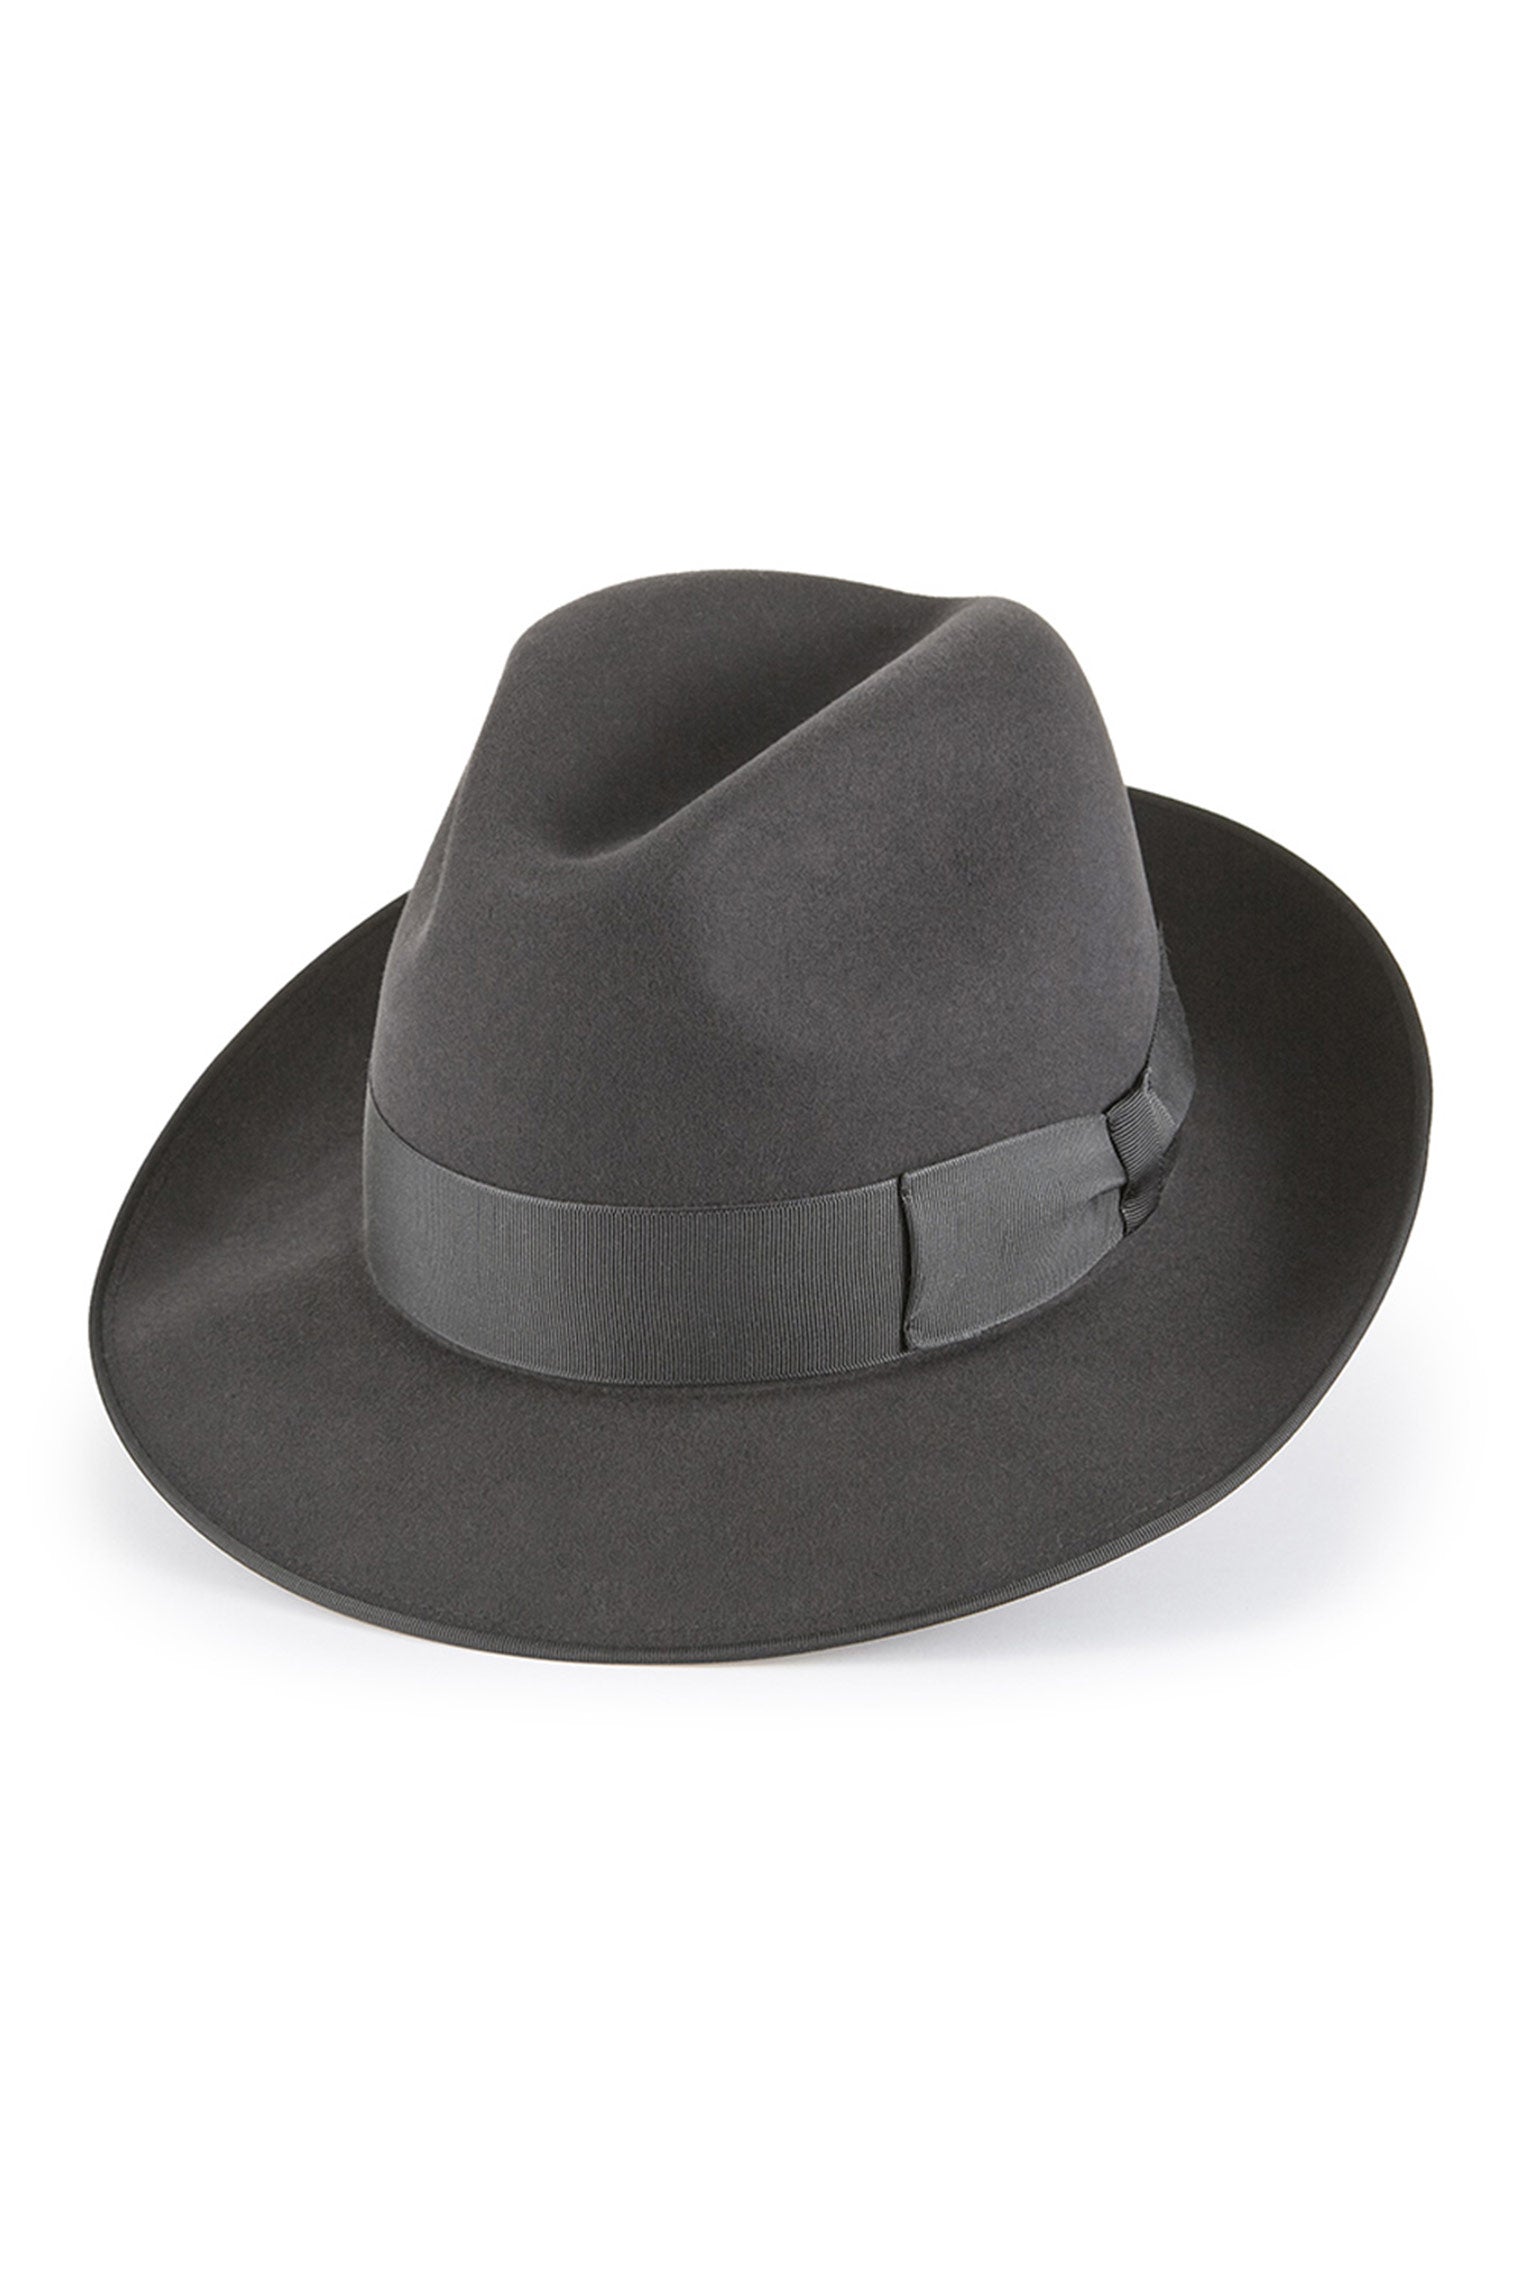 Escorial Wool Albany Trilby - Hats for Heart-shaped Face Shapes - Lock & Co. Hatters London UK